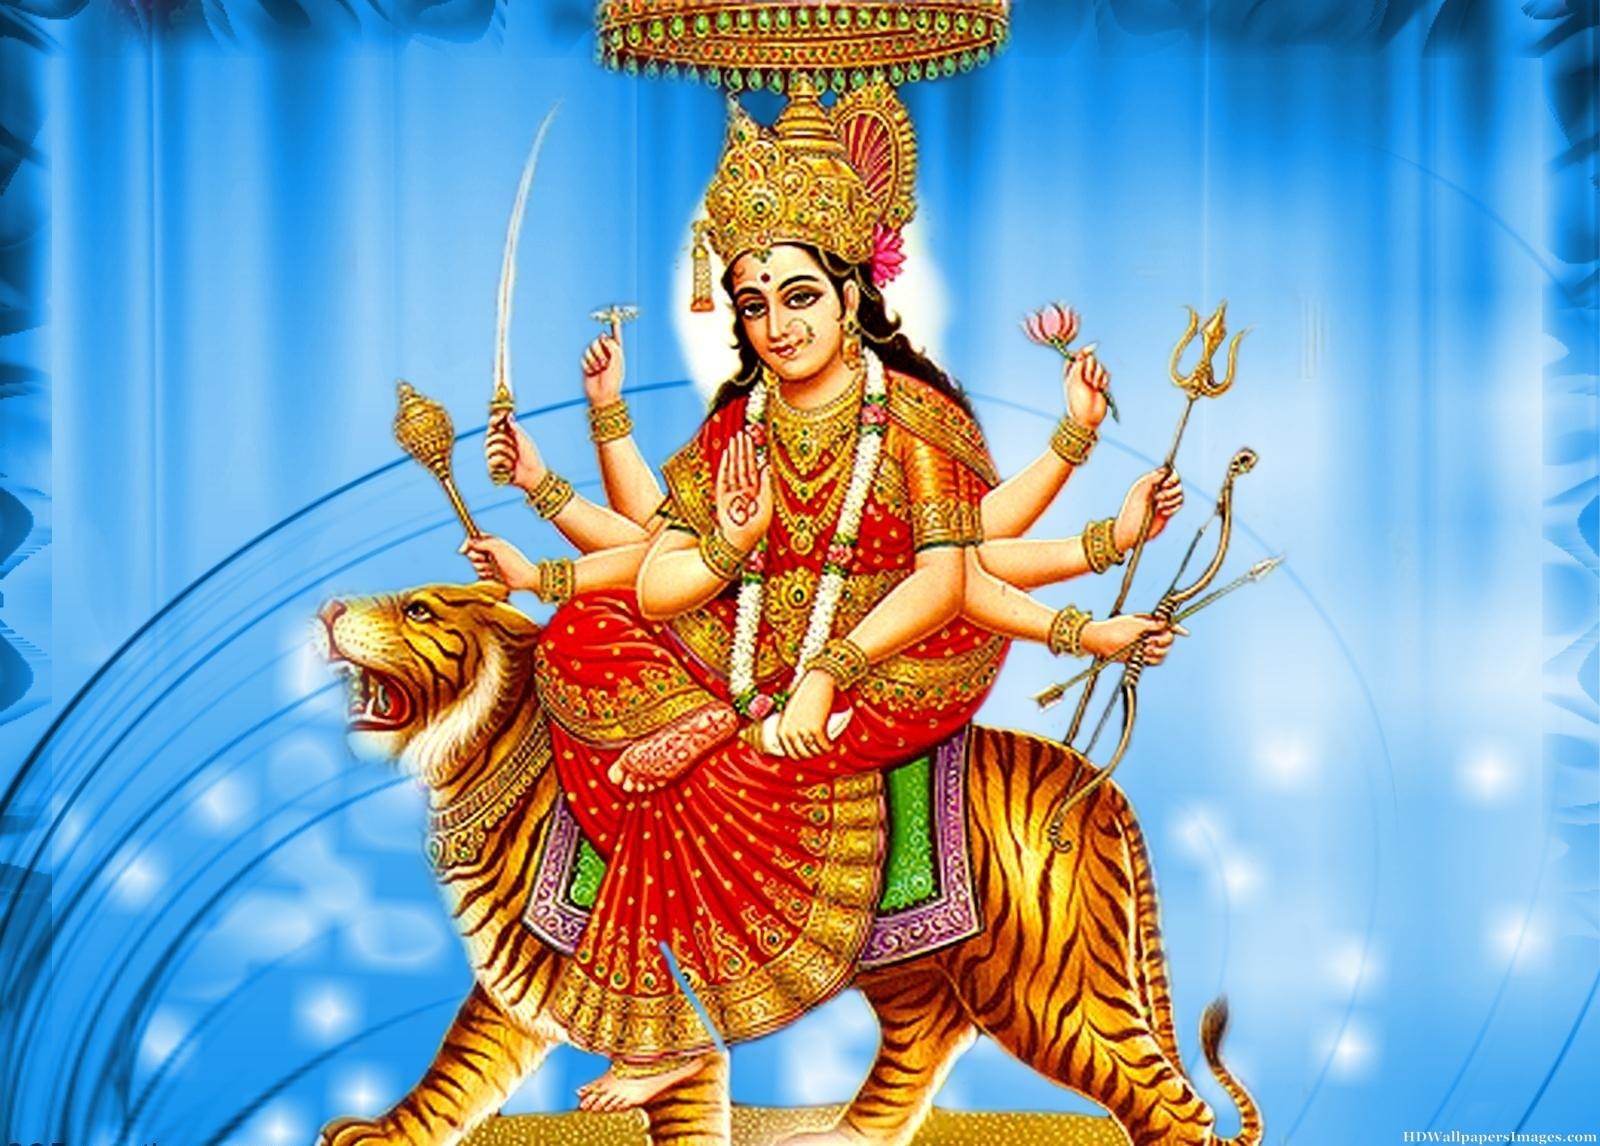 The Most Unique and Beautiful Collection of Maa Durga Image! 